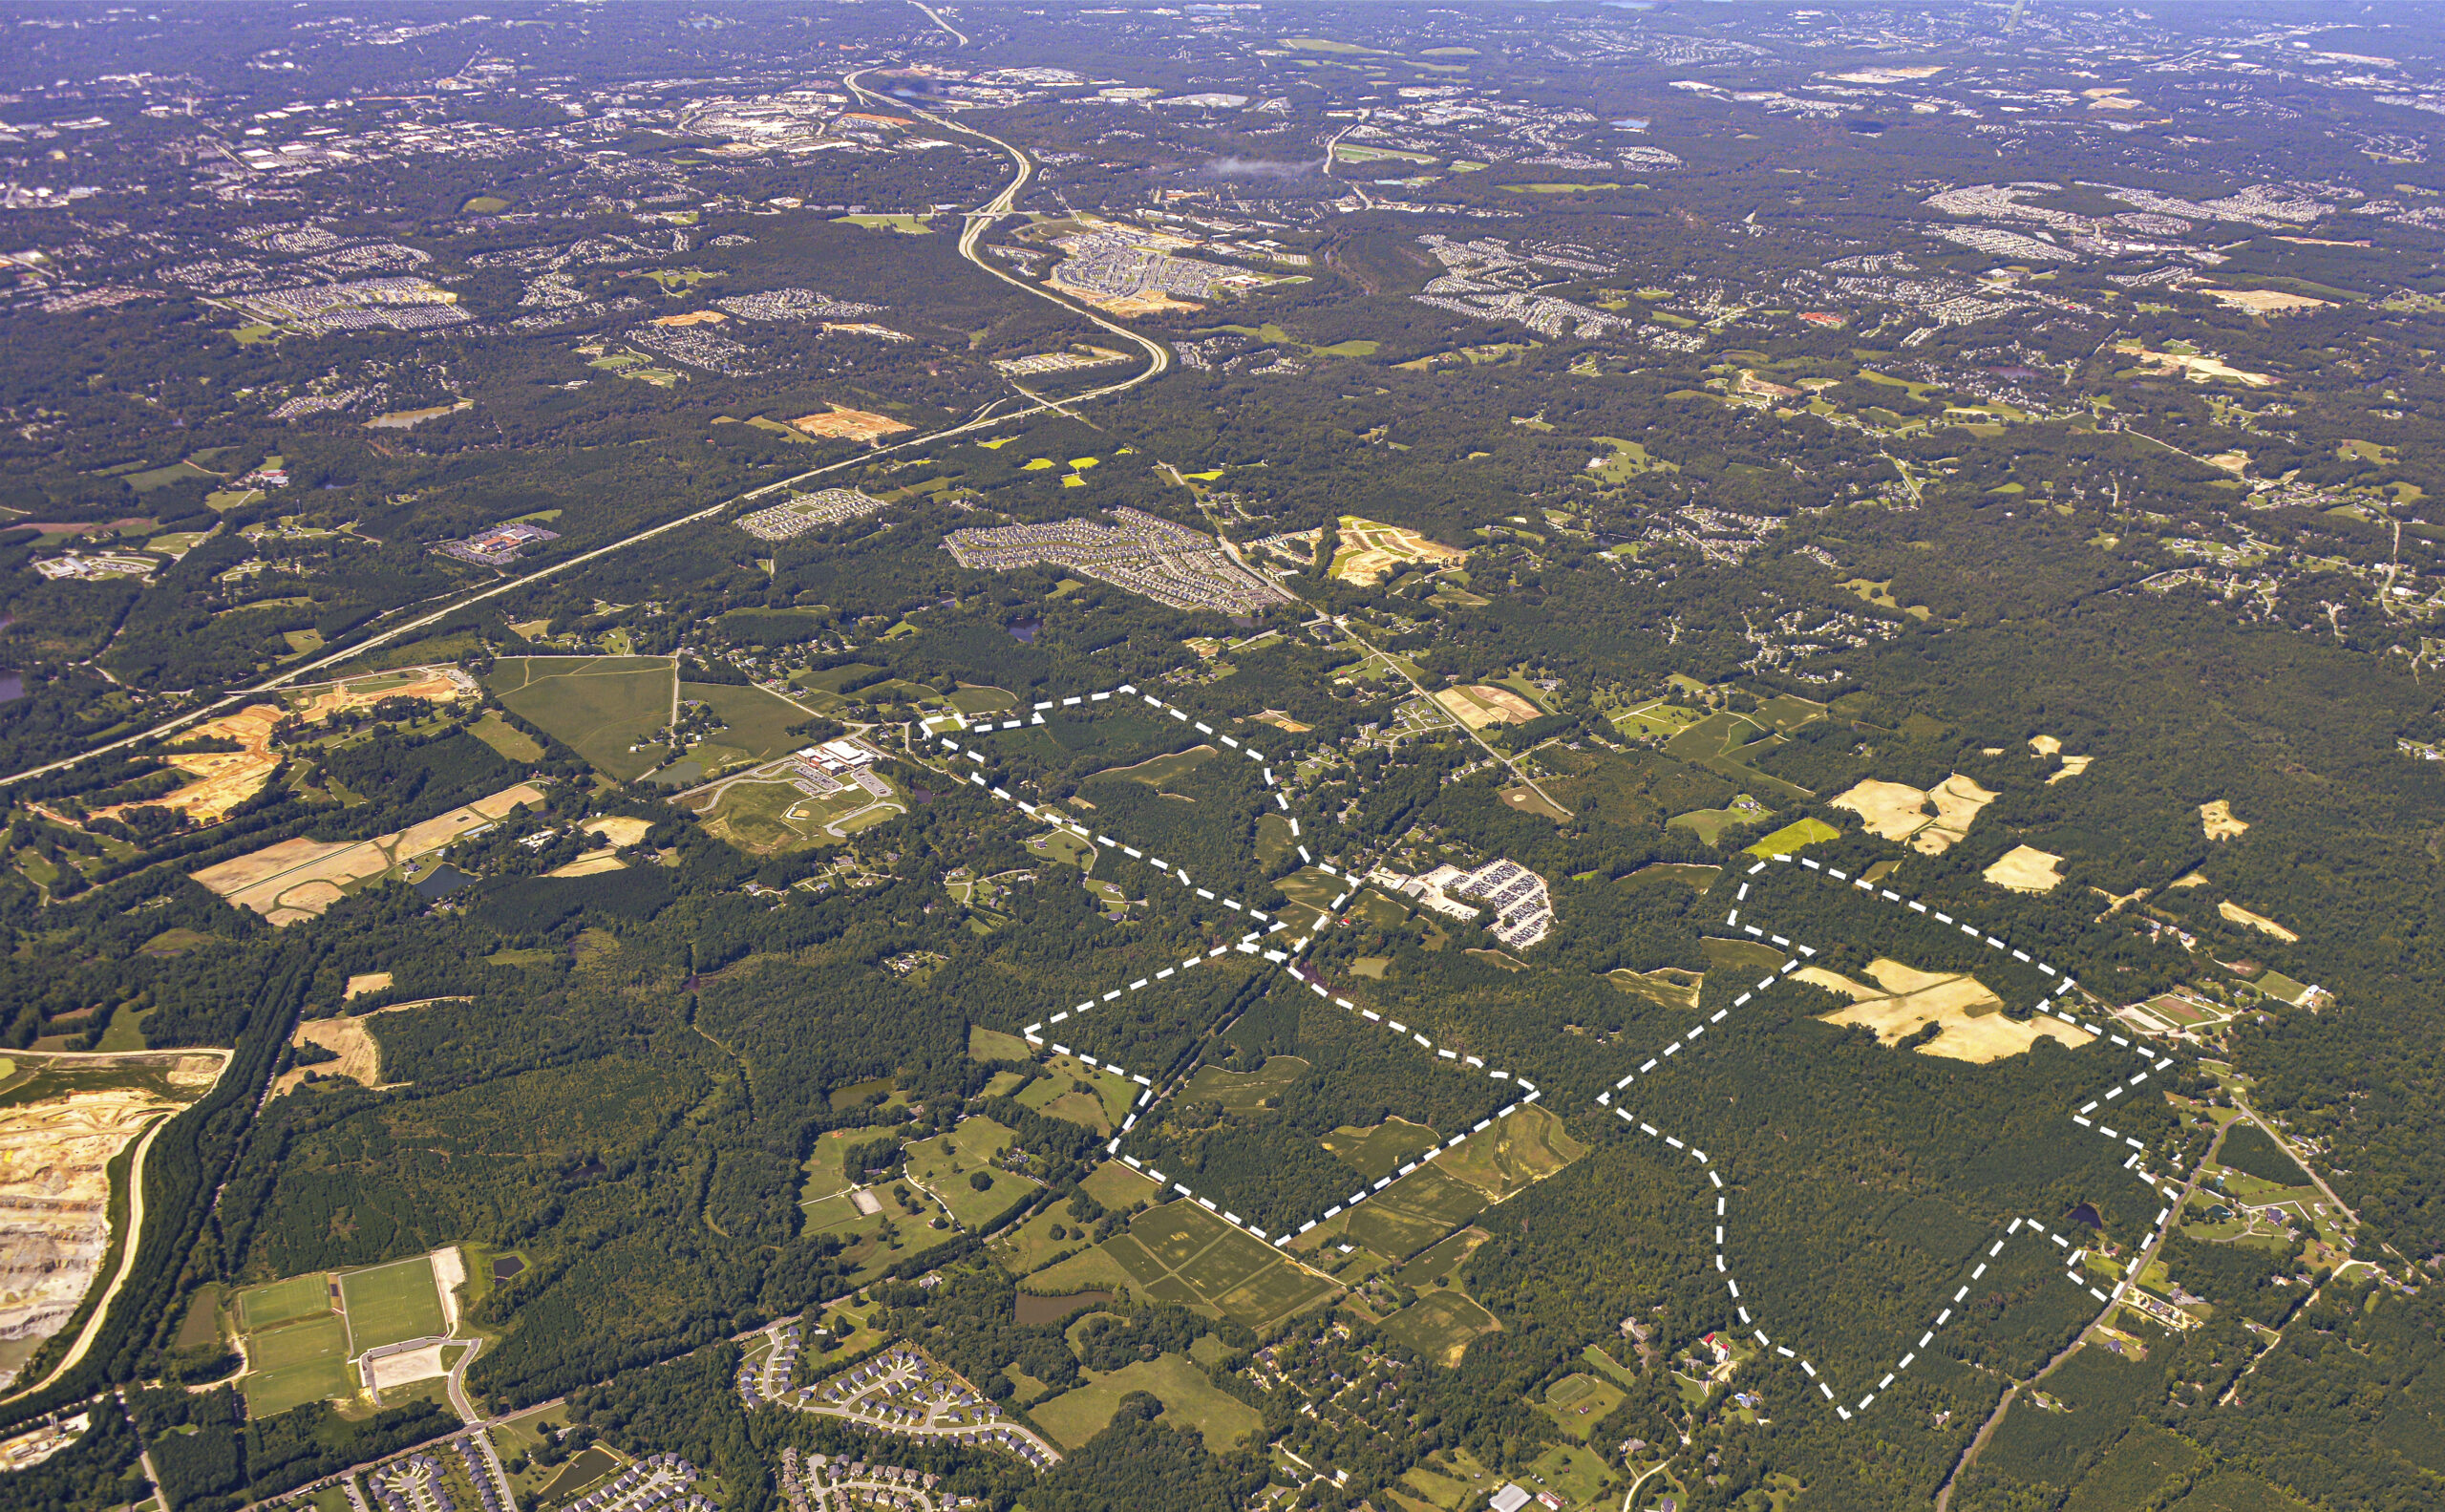 Developer envisions 778 homes for eastern Wake County